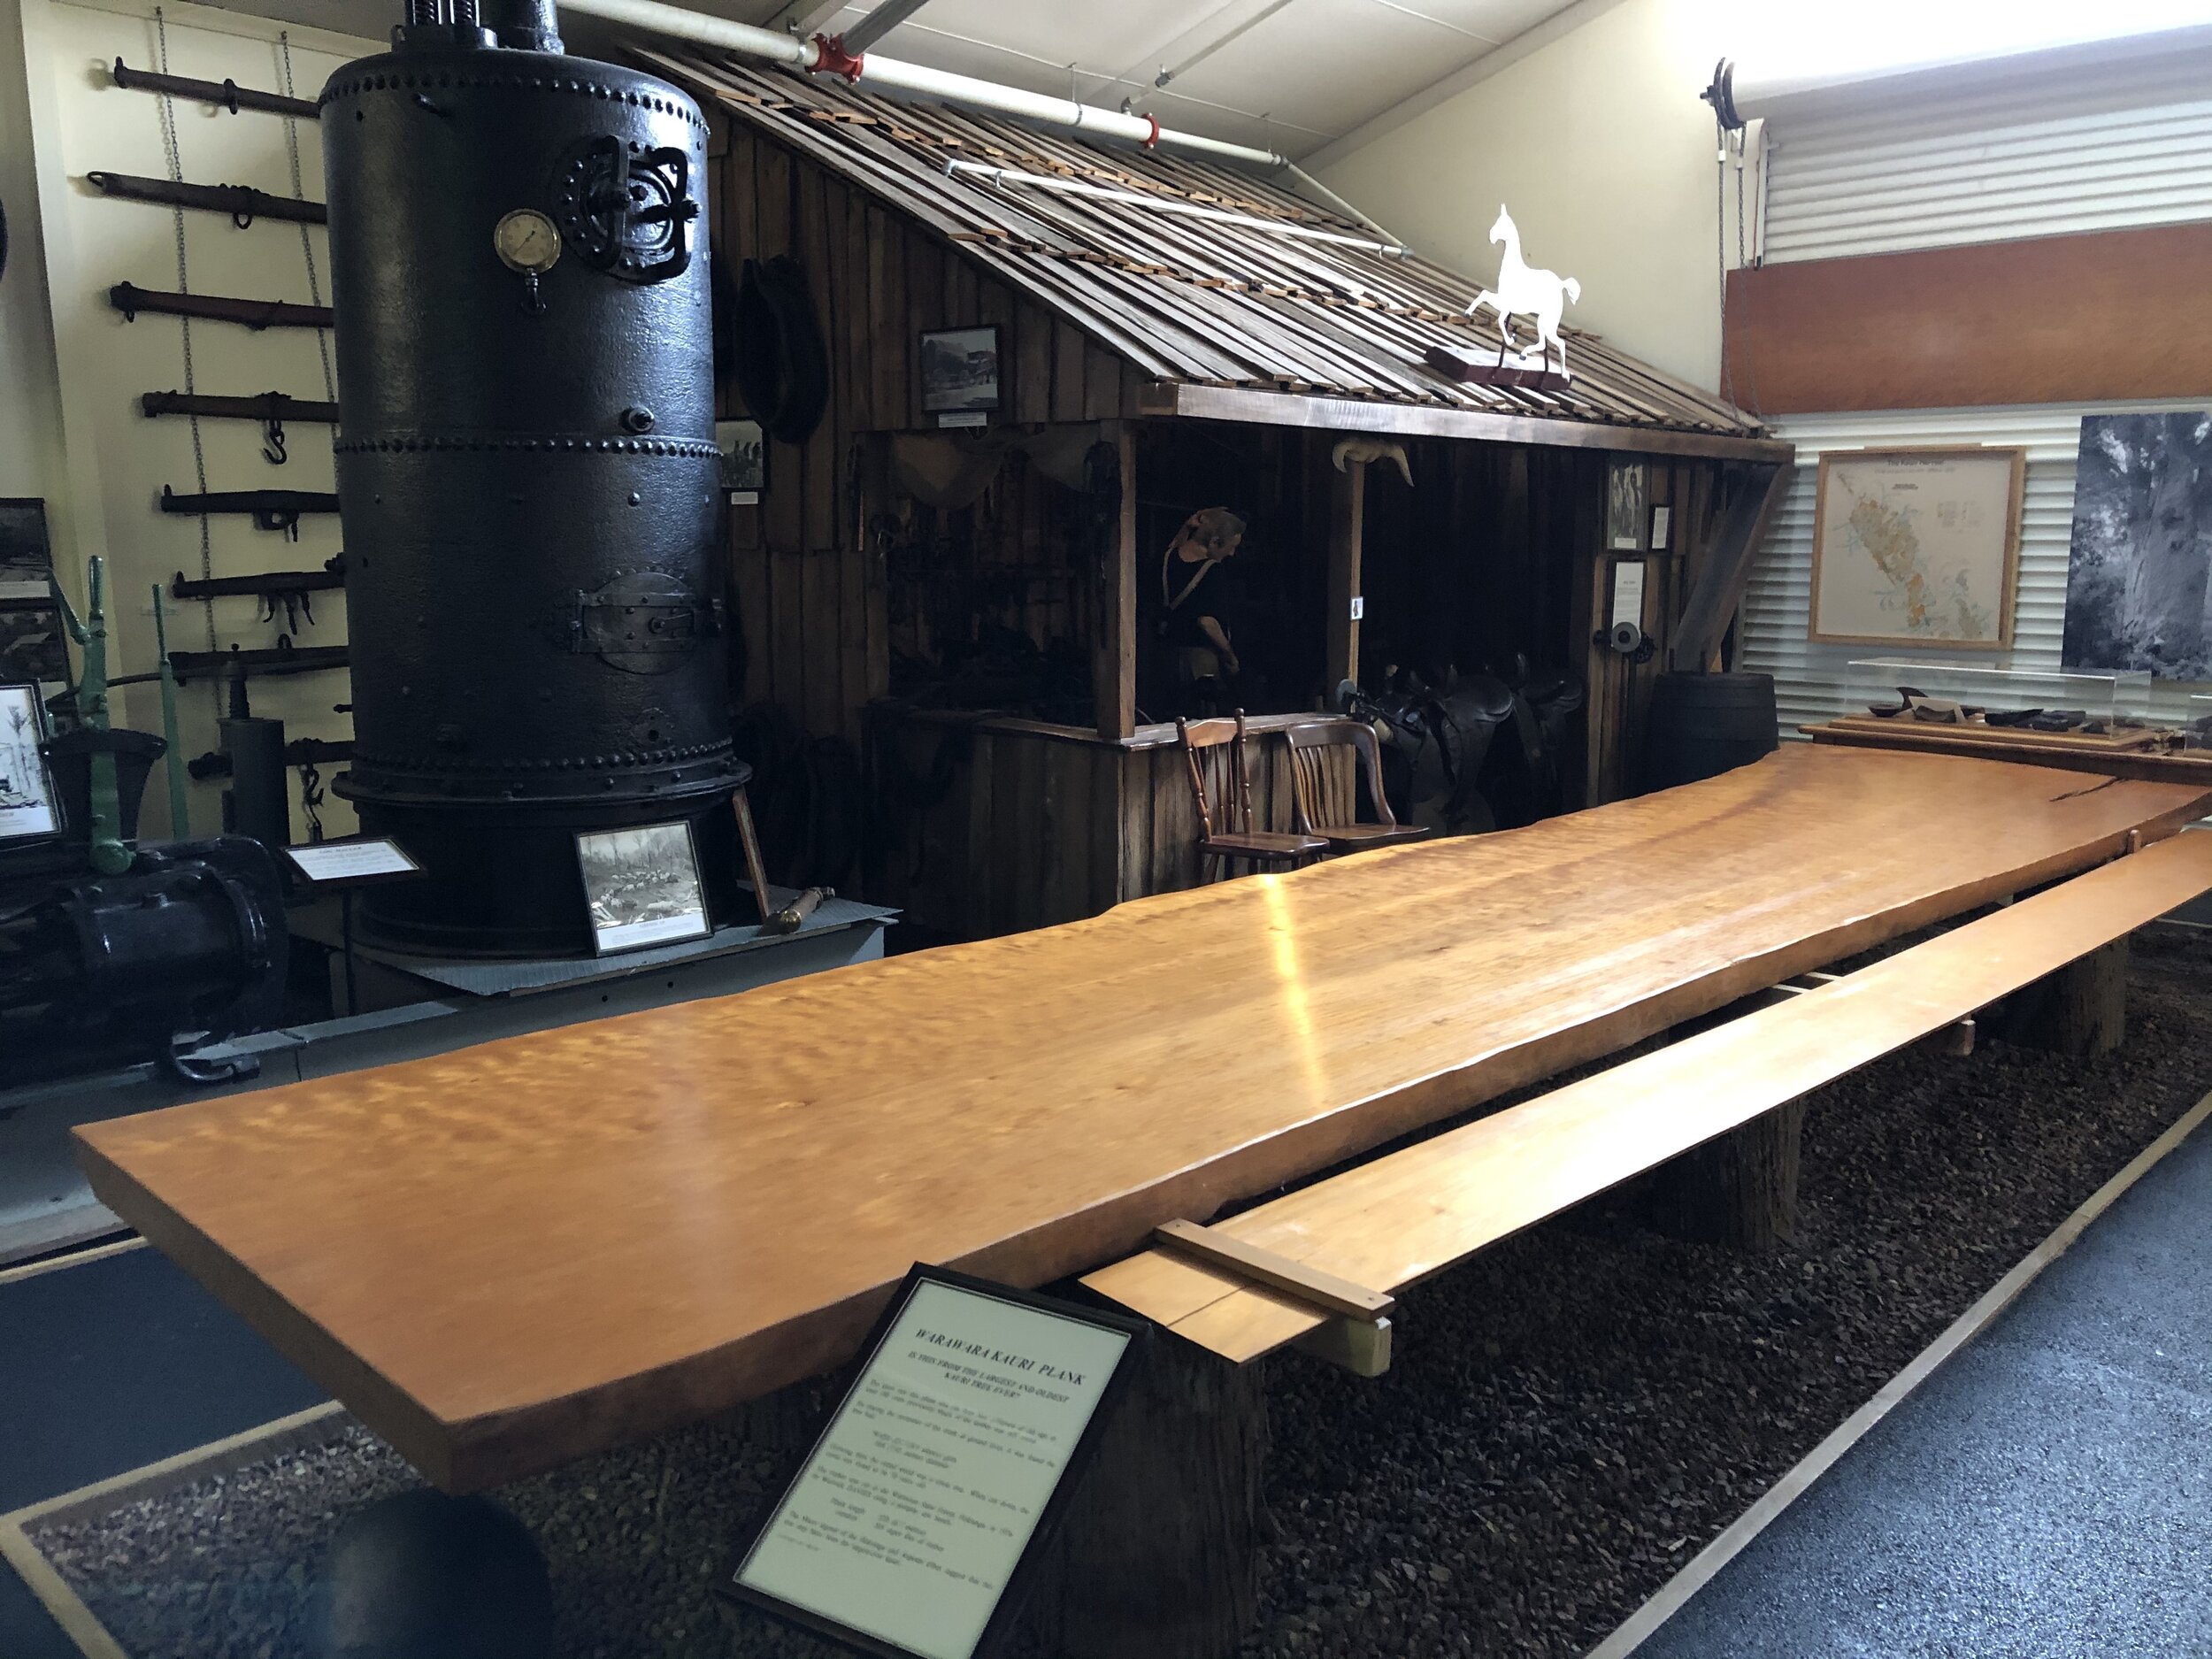  The Kauri Museum contains a large plank recovered from a fallen tree that had a girth 23.7-24.9 m (78-82 ft) and a diameter if 7.92 m (26 ft) and may be the largest kauri ever recorded. In addition to living trees, subfossil trunks buried in the mud